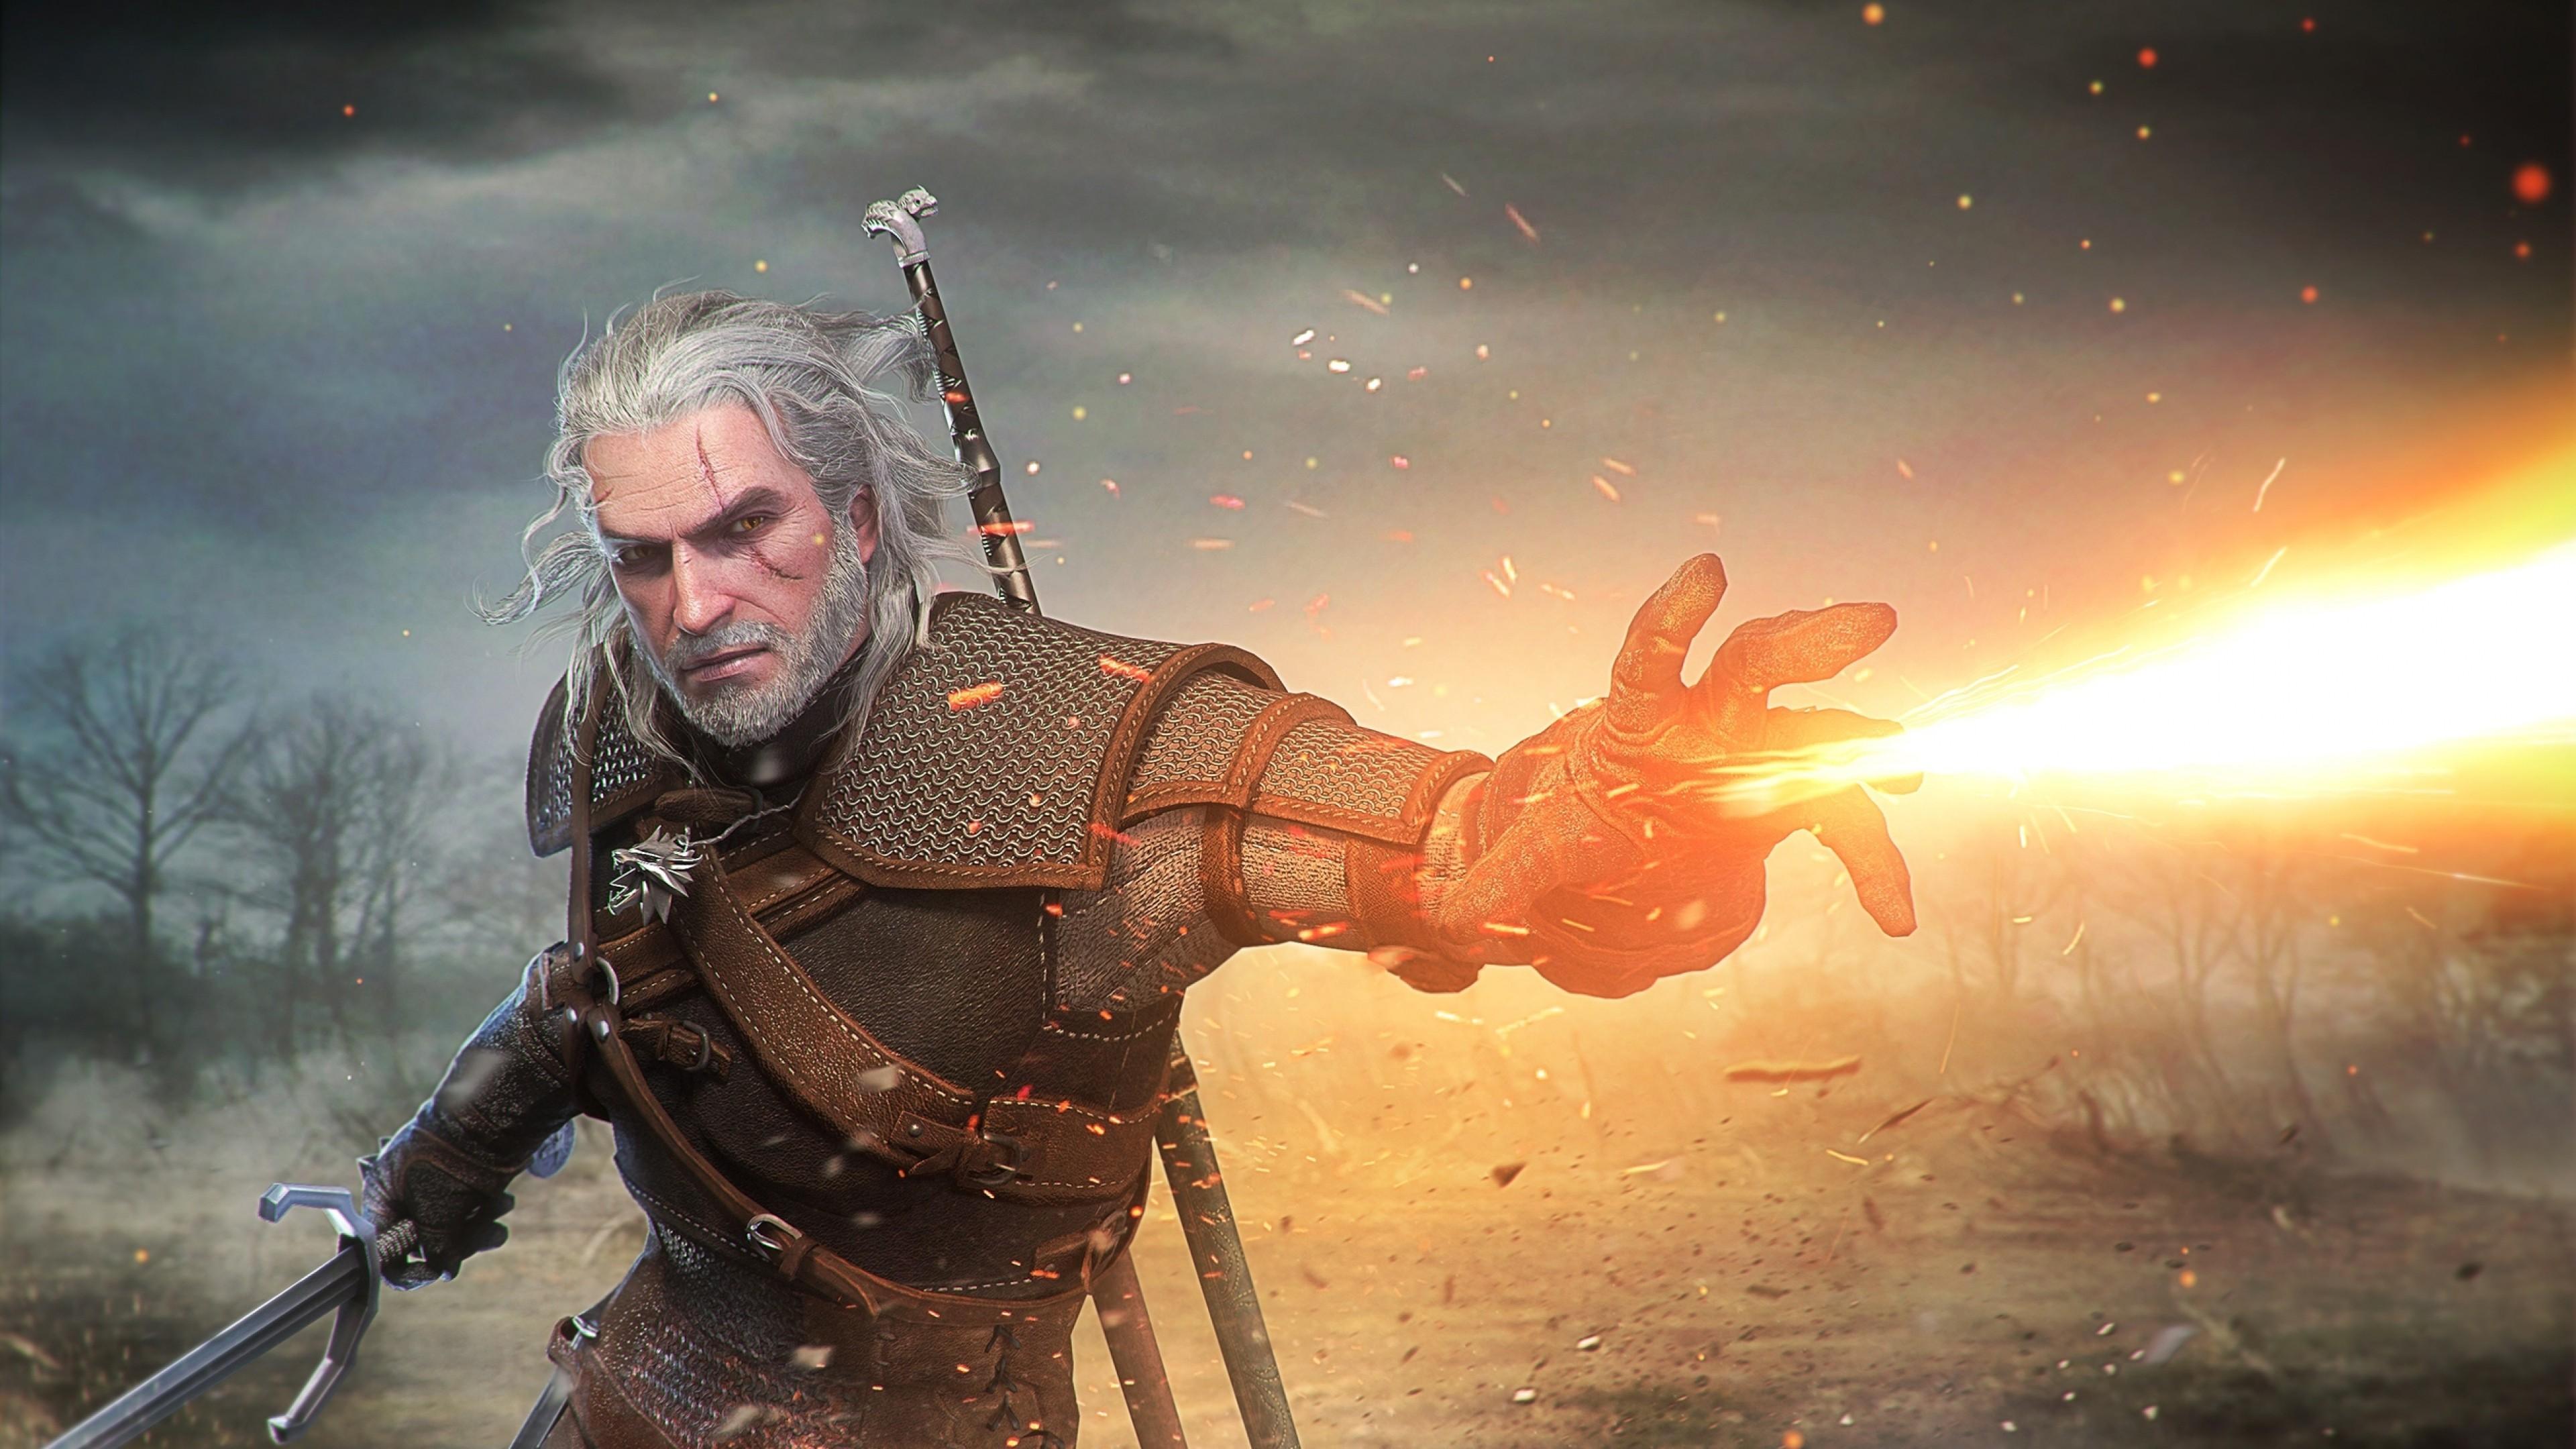 3840 x 2160 · jpeg - The Witcher 3 Wild Hunt Artwork, HD Games, 4k Wallpapers, Images ...